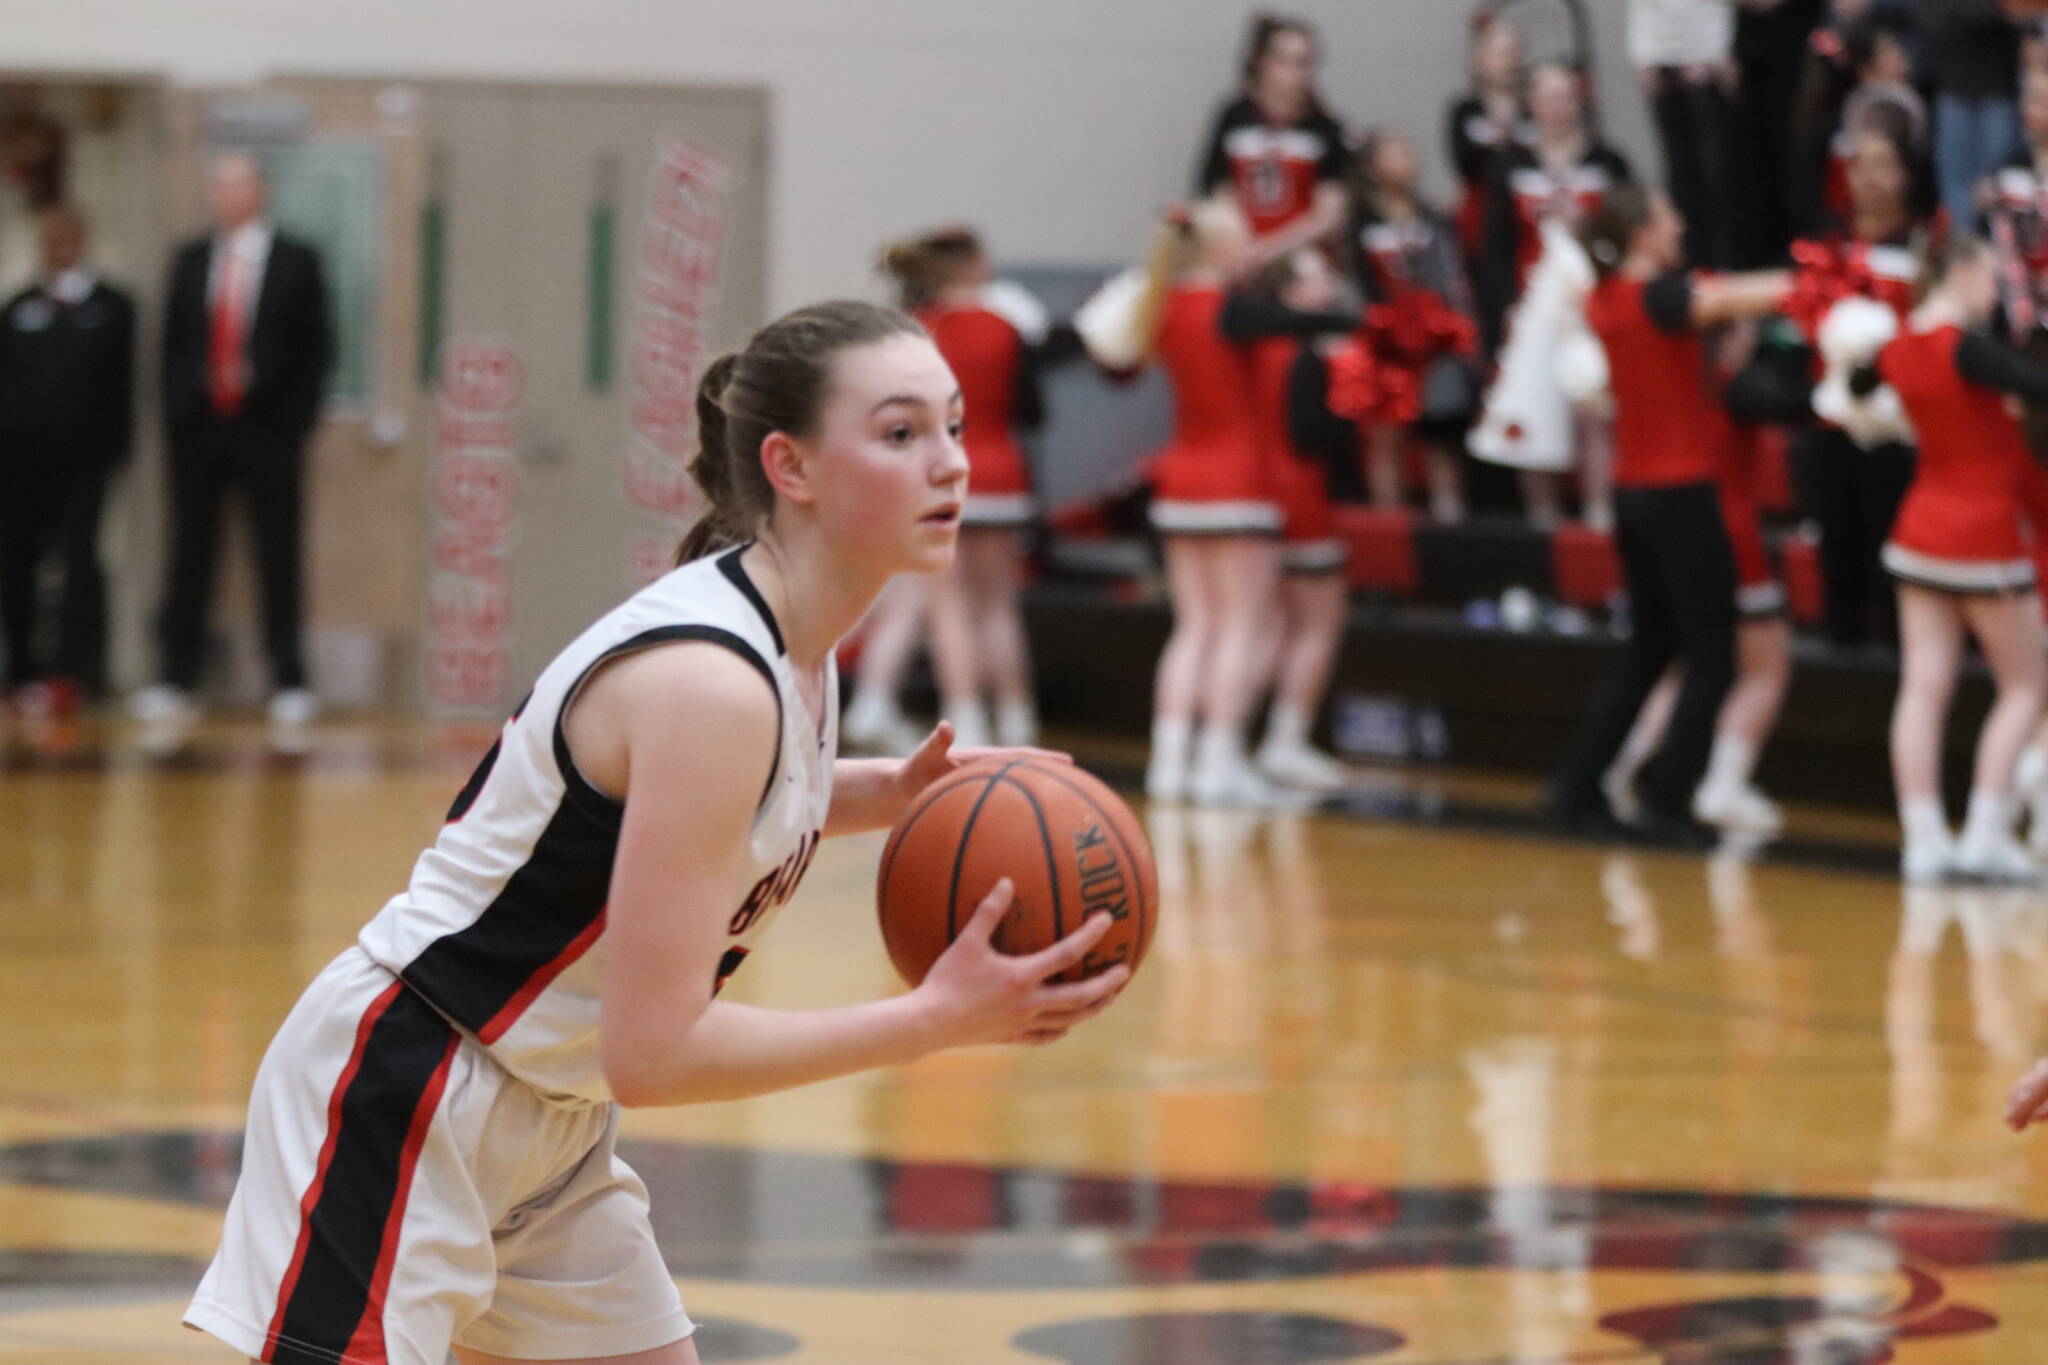 Jonson Kuhn / Juneau Empire
JDHS freshman Gwen Nizich looks for an open pass down court on Thursday night’s game against TMHS. Nizich led the Crimson Bears in scoring for a total of 13 points.